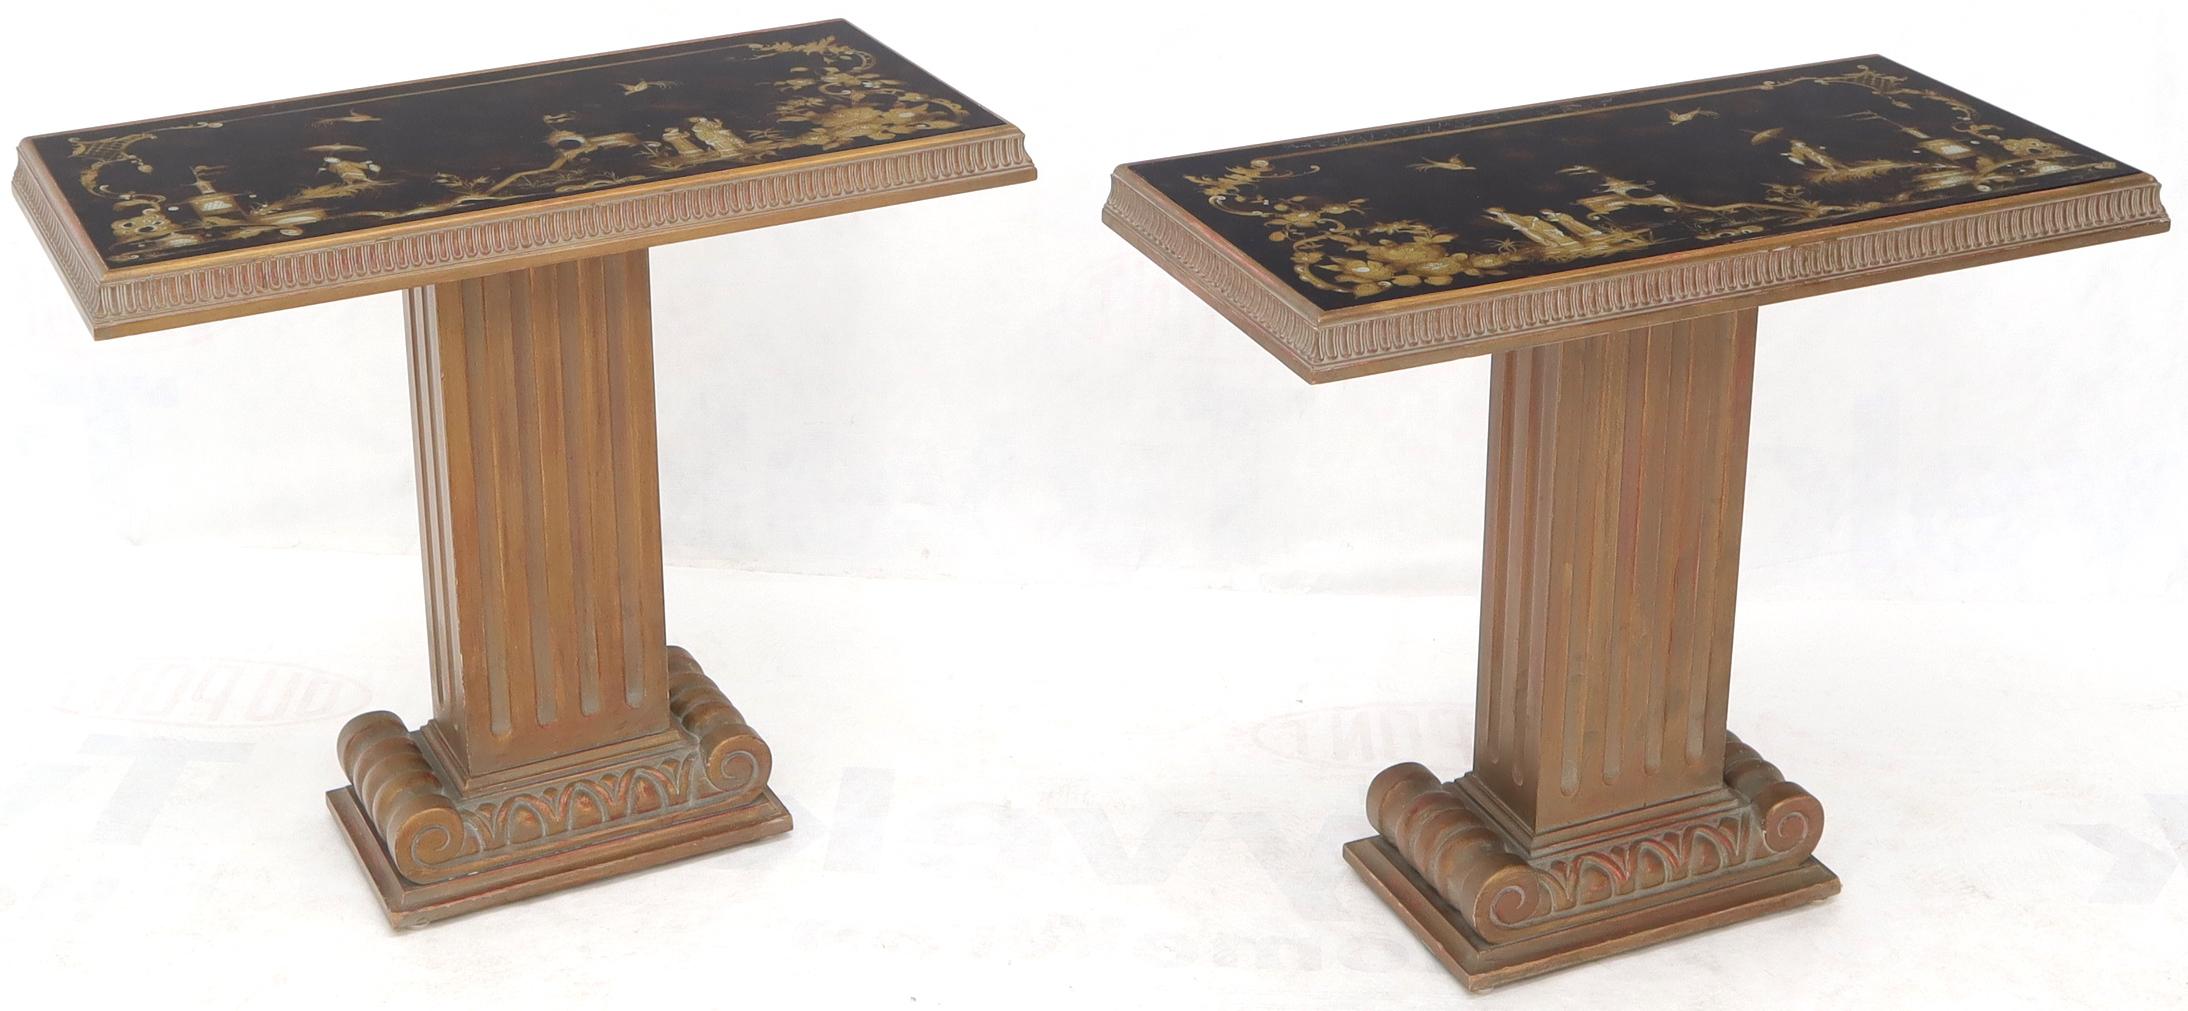 Pair of Reverse Painted Glass Tops Single Pedestal Side Occasional Tables In Good Condition For Sale In Rockaway, NJ